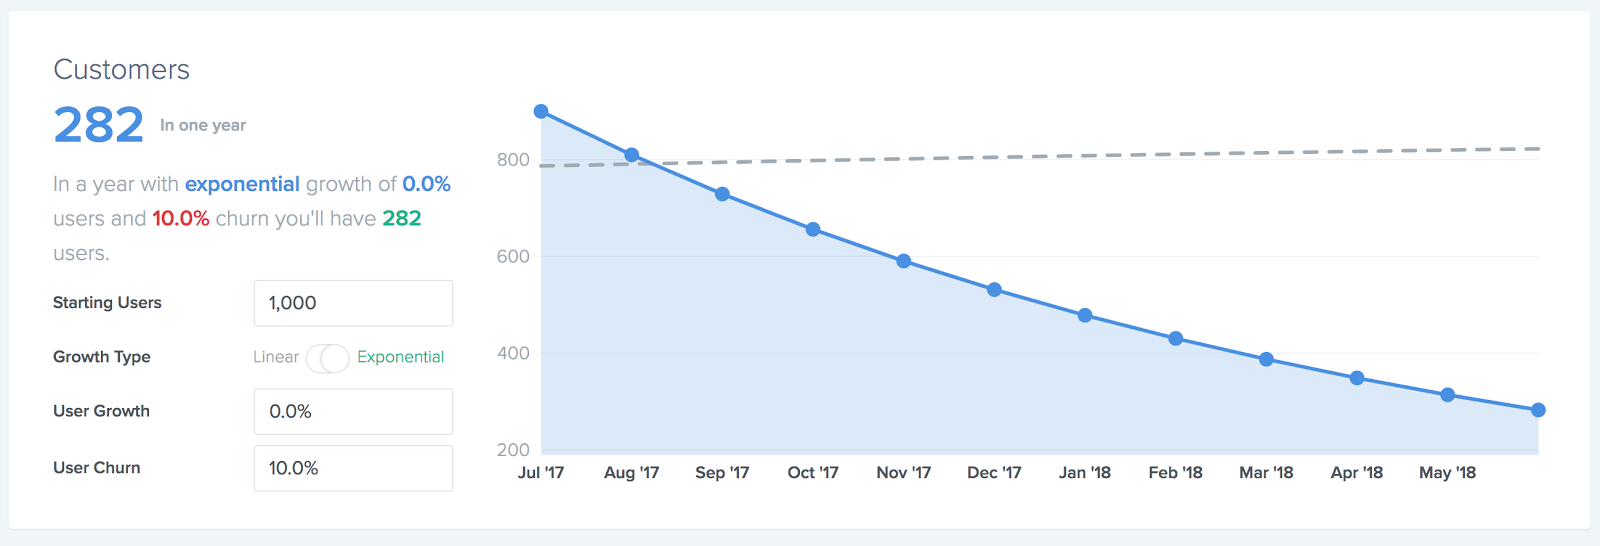 Define Churn Rate: Image of a customer churn graph at 10% monthly churn